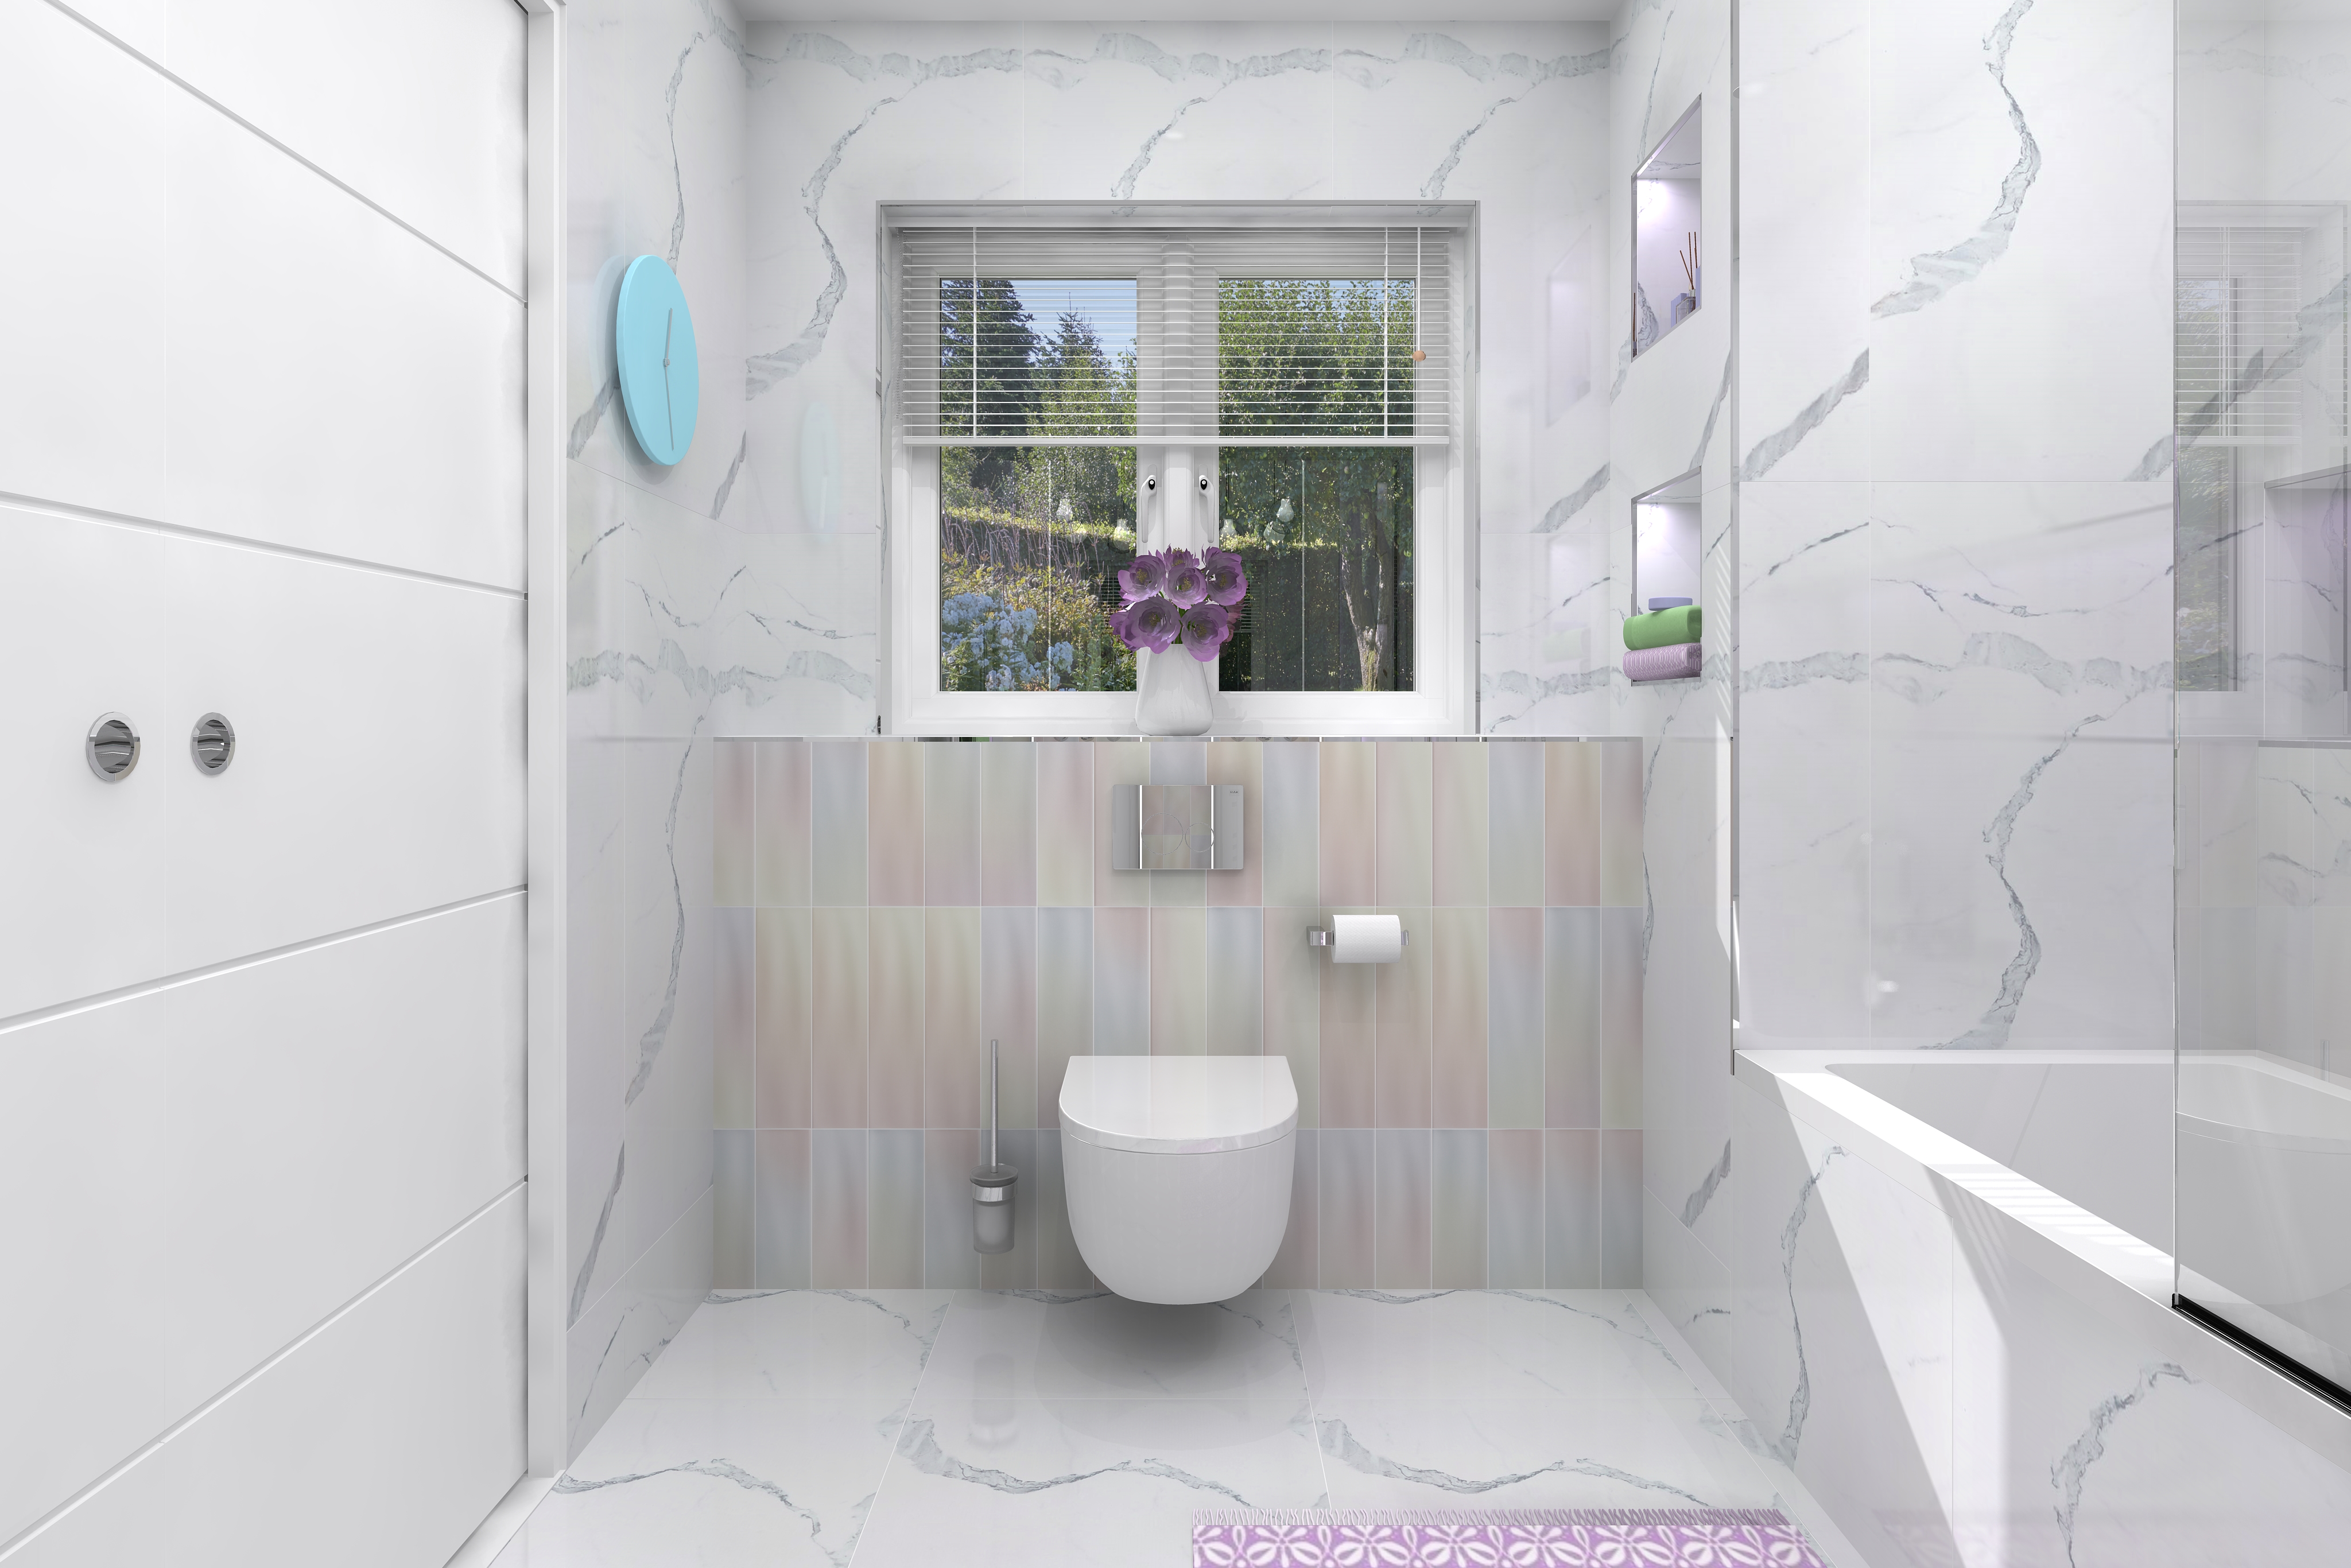 Digital lifestyle image the Gemini inspired bathroom, with two tonal tiles with pink hues, wall hung toilet paired with chrome push plates, chrome toilet roll holder and chrome toilet brush holder, an integrated shelf with a vase of flowers and a smaller integrated shelf with bath tiles